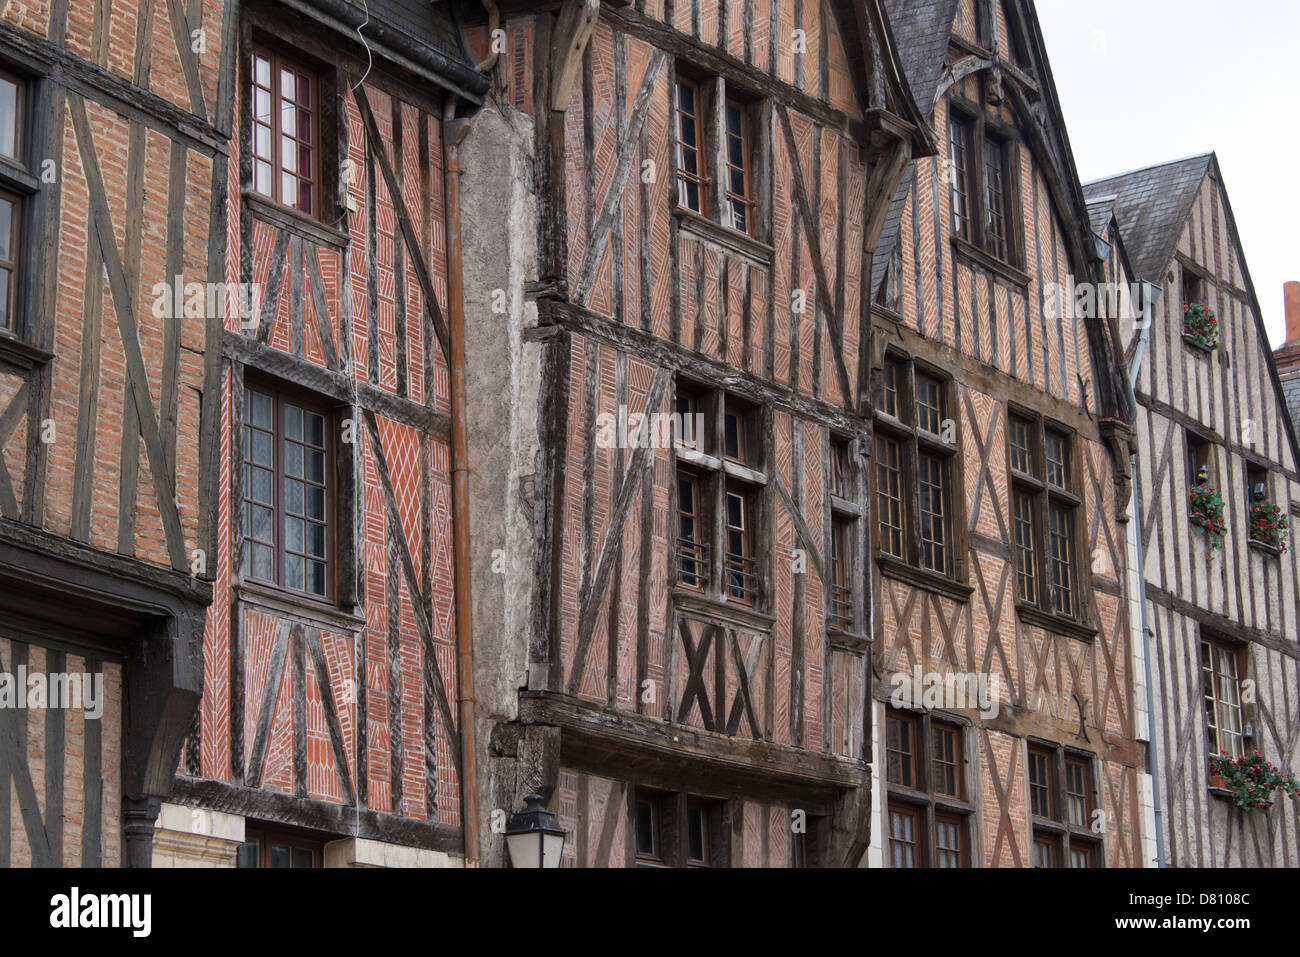 Wooden buildings in Place Plumereau, Tours, Loire Valley, France Stock Photo